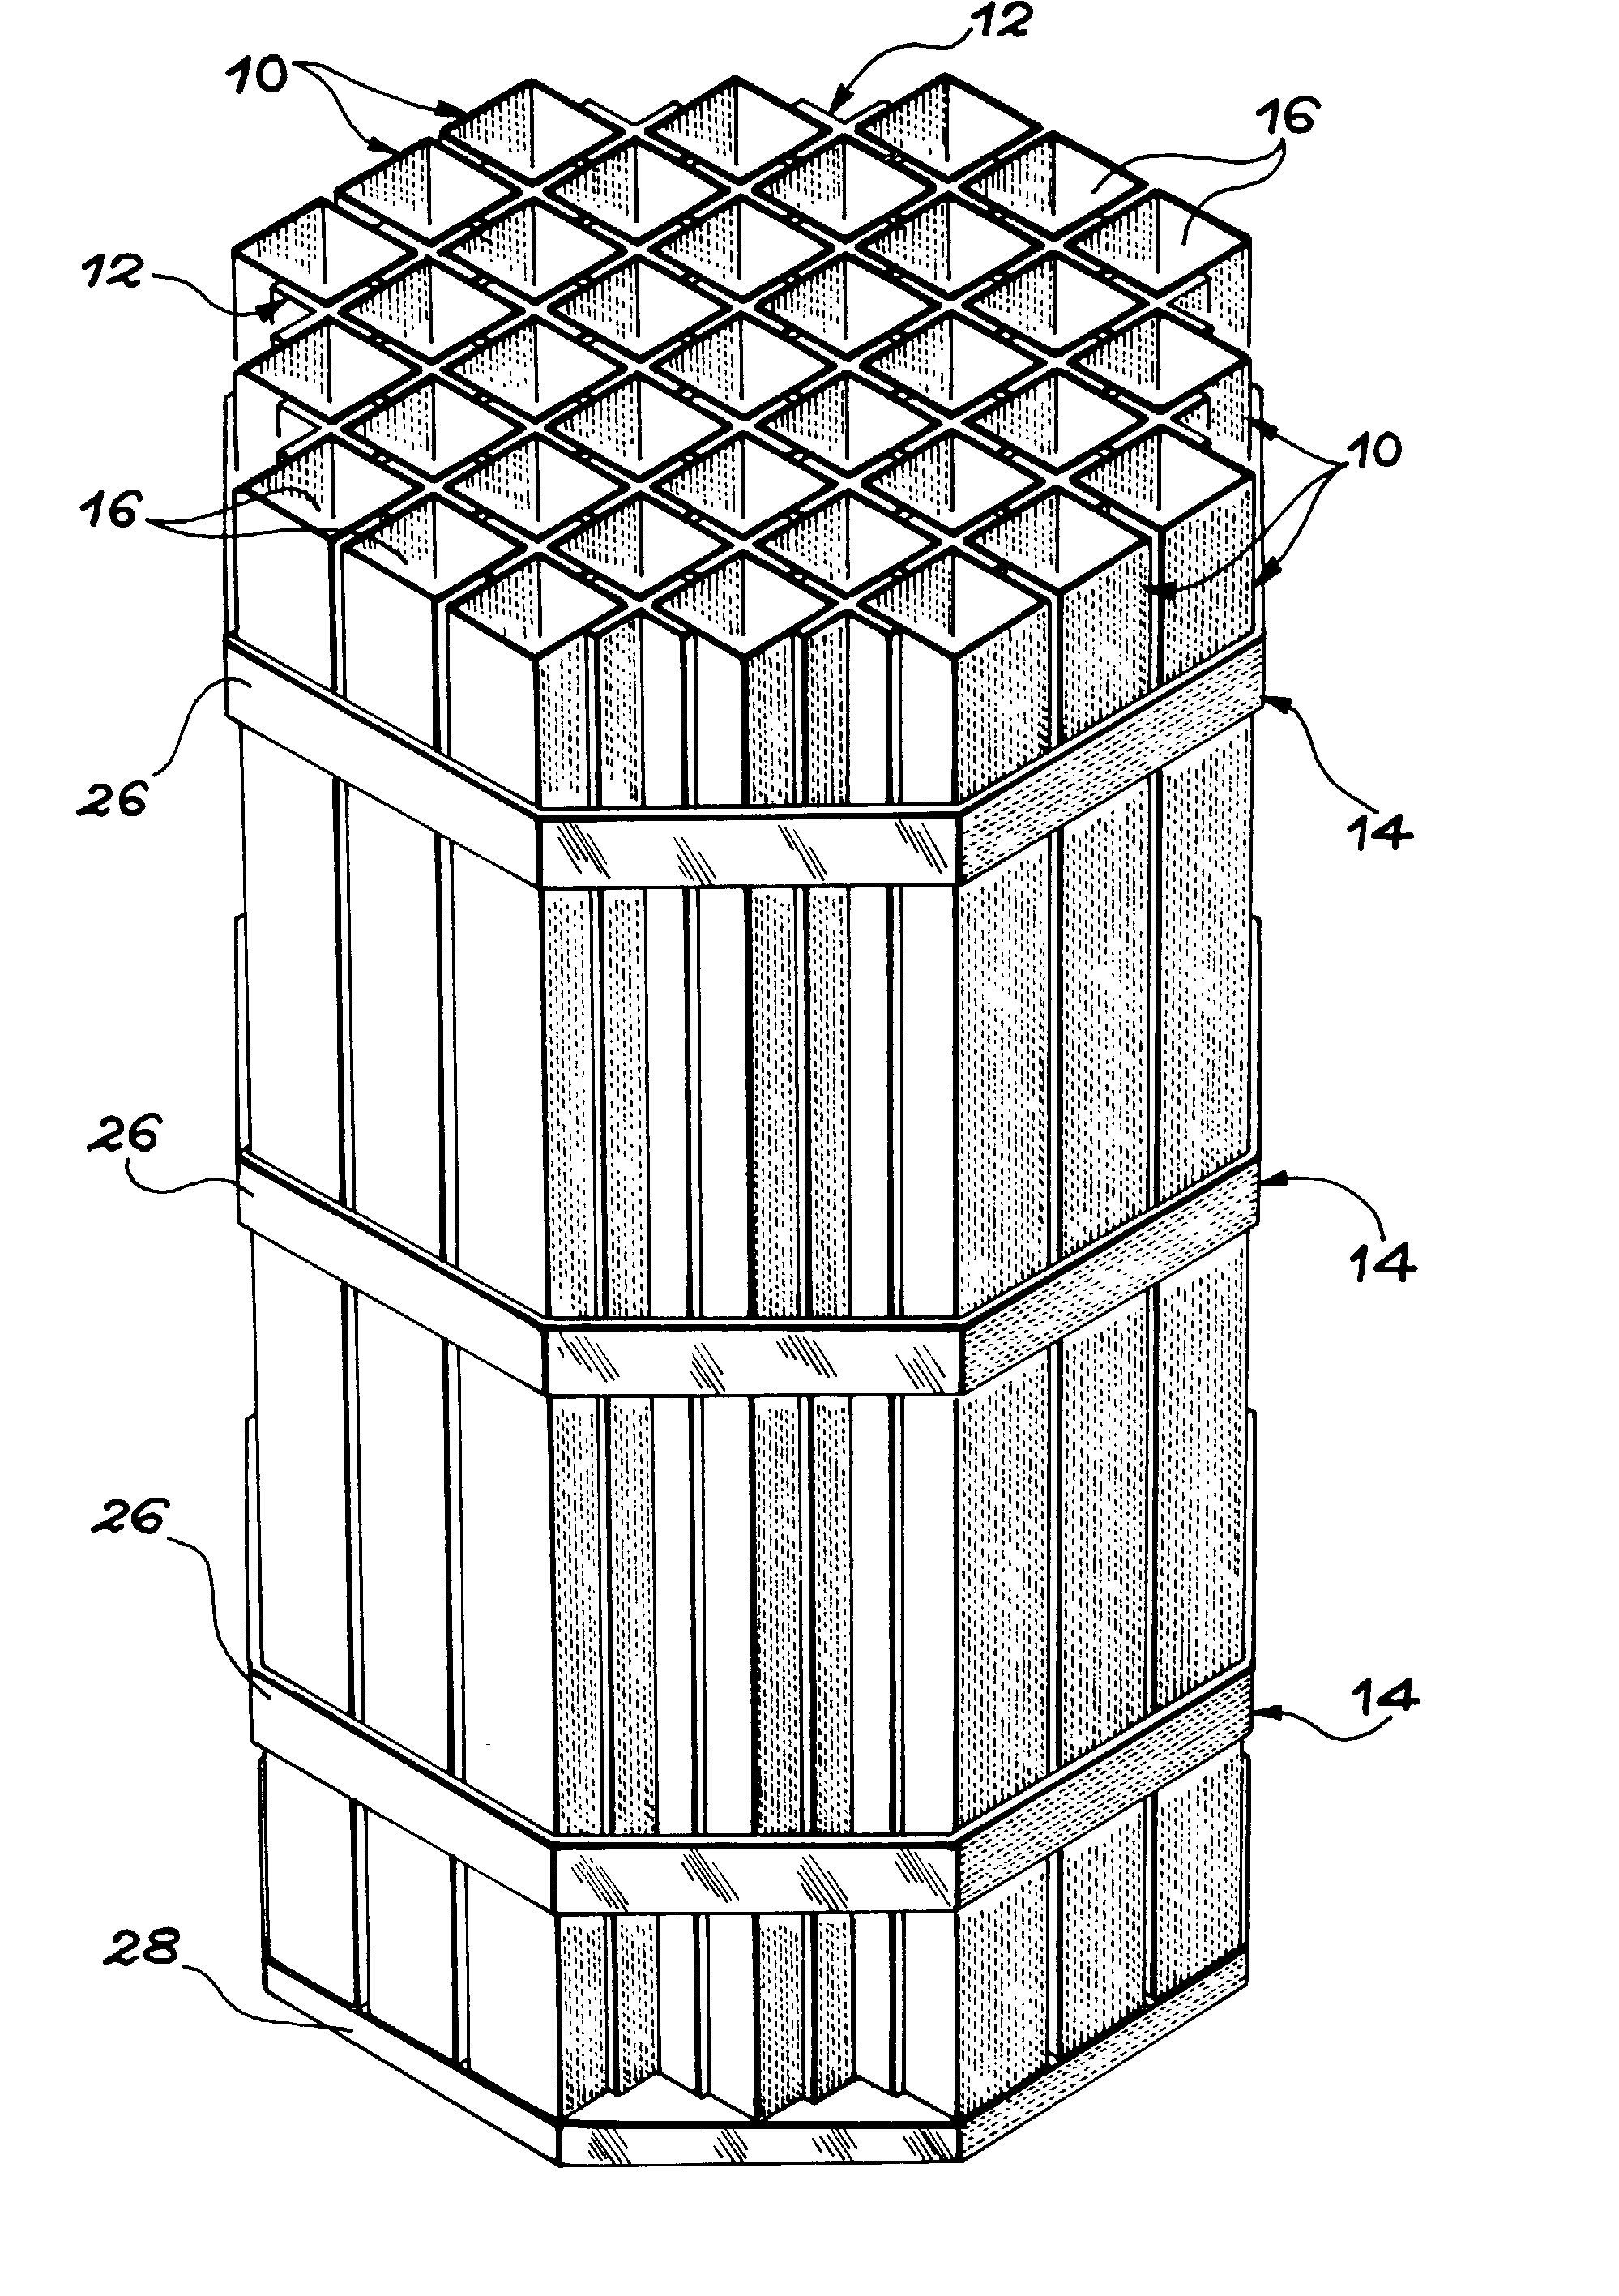 Storage container for radioactive materials